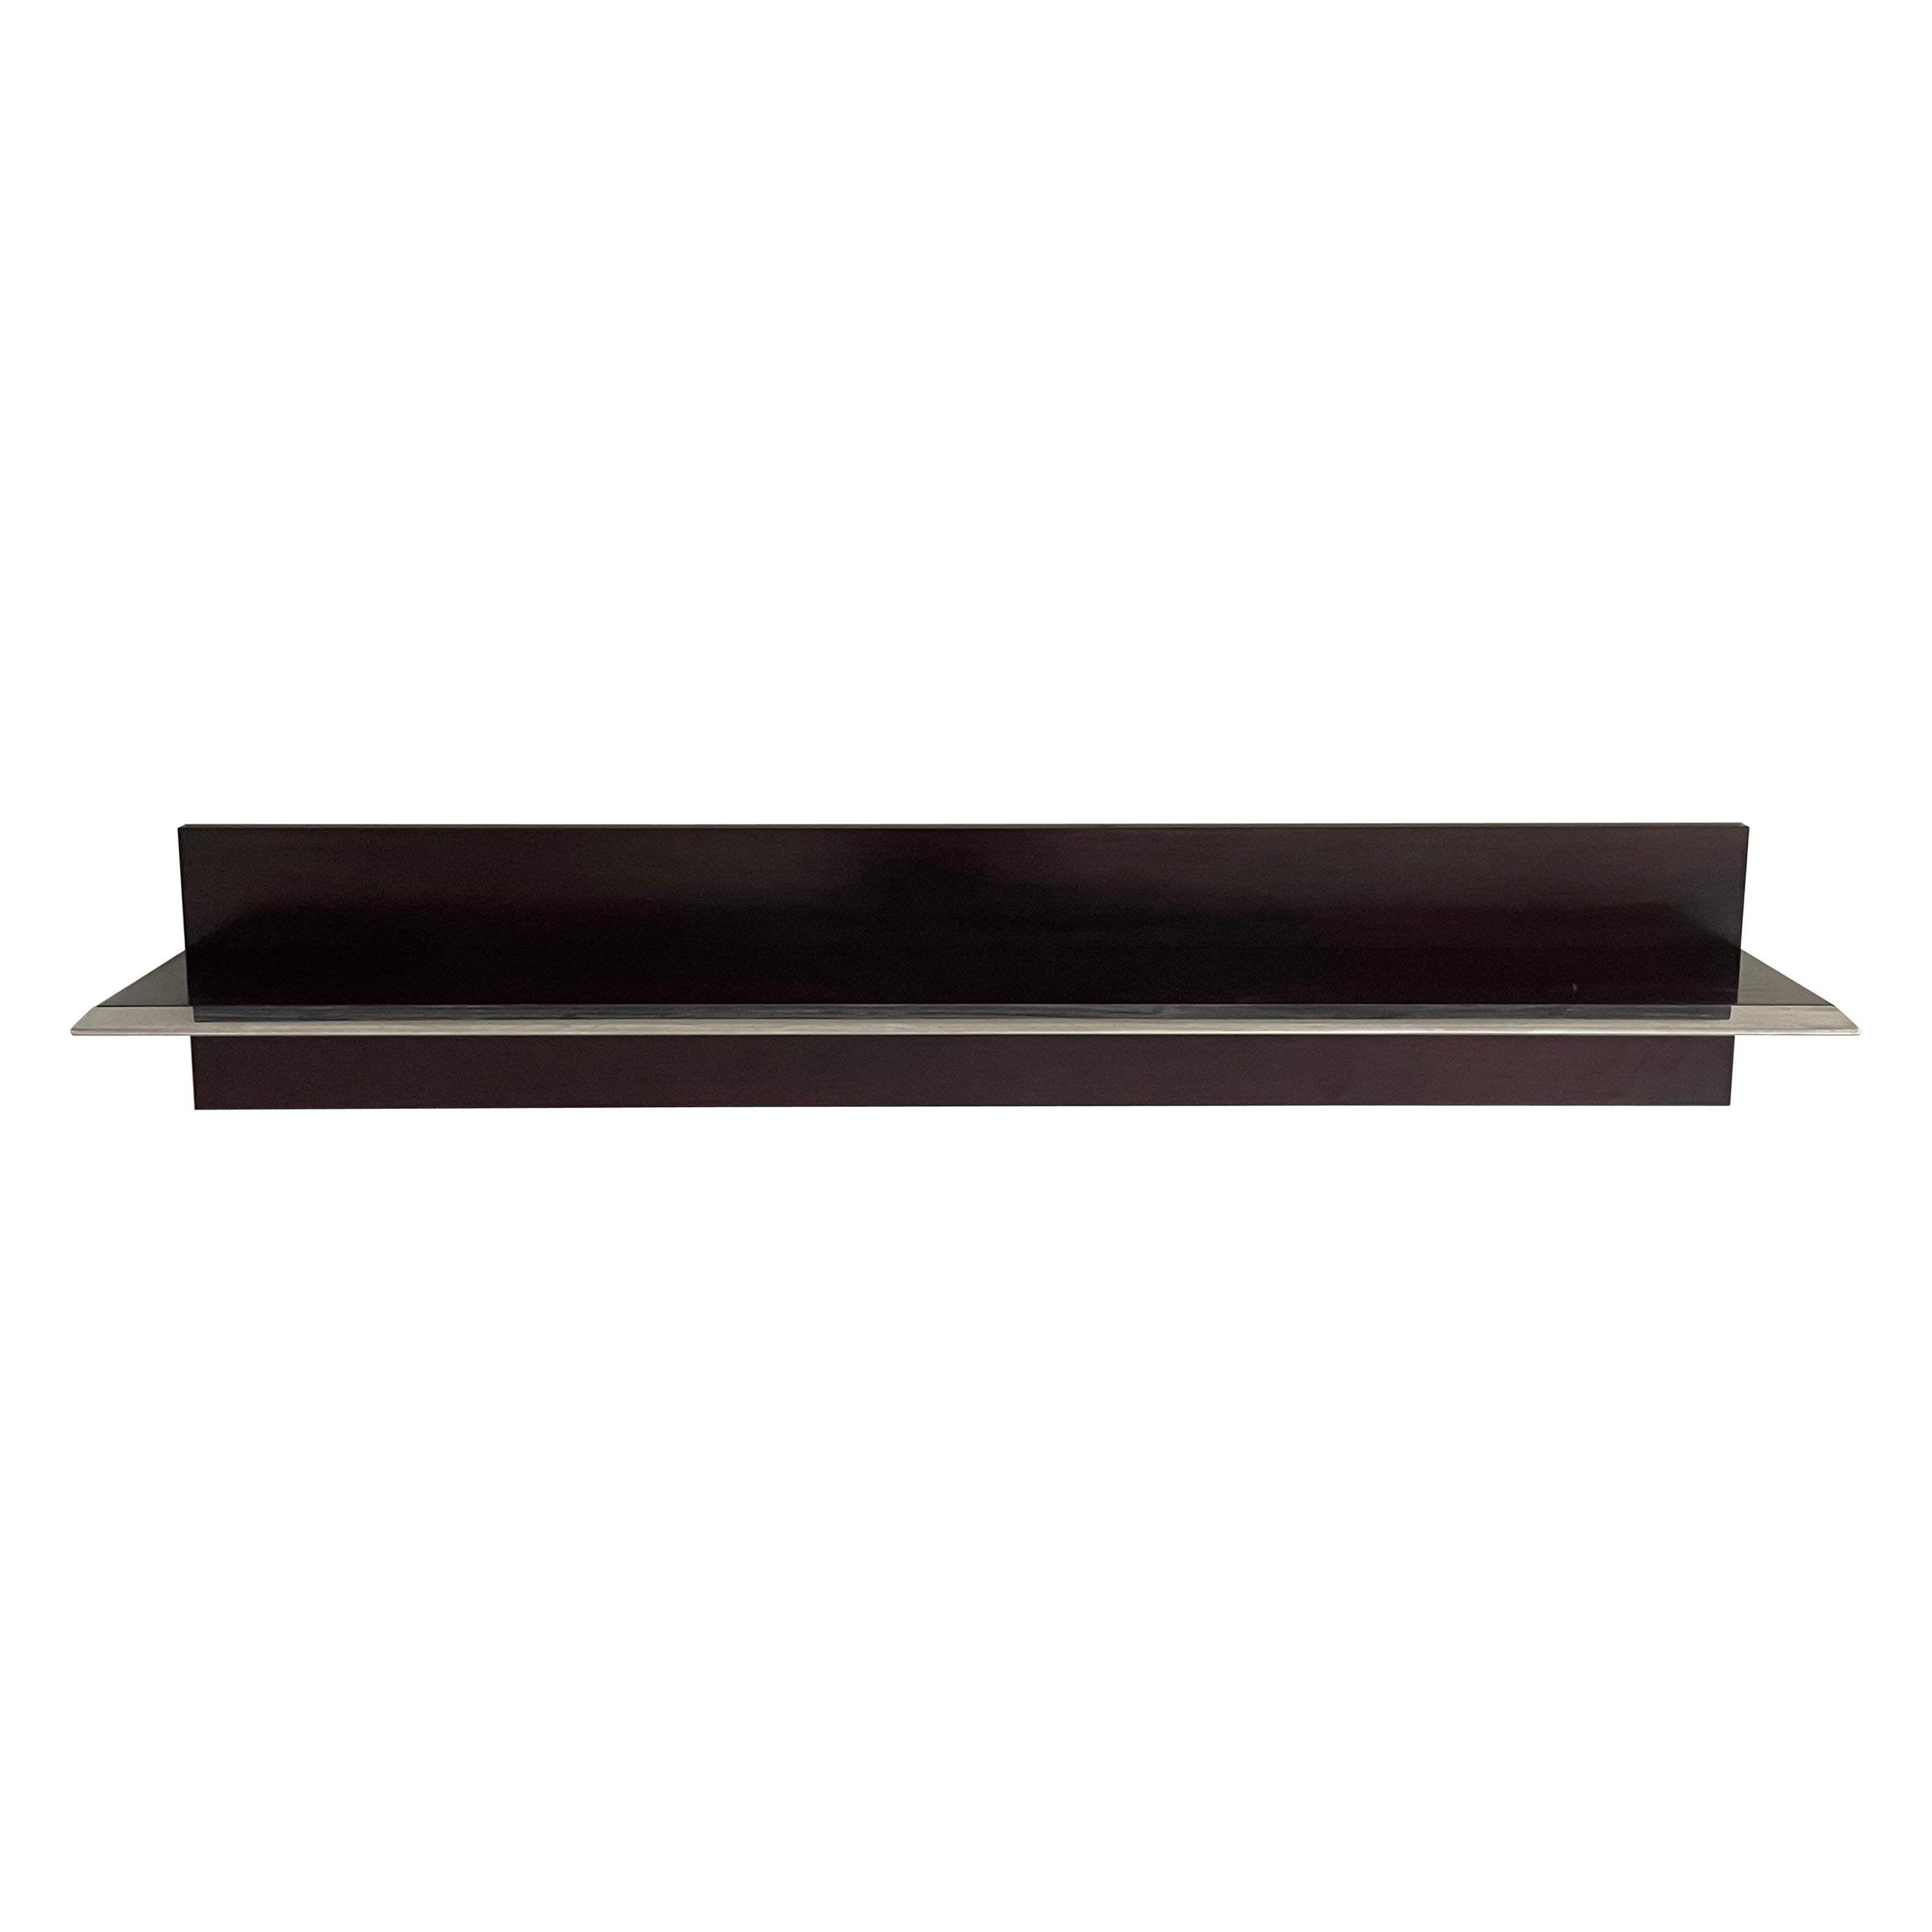 Mid-century Modern Rosewood Large Shelf Steel Cover by Saporiti, 1960s, Italy For Sale